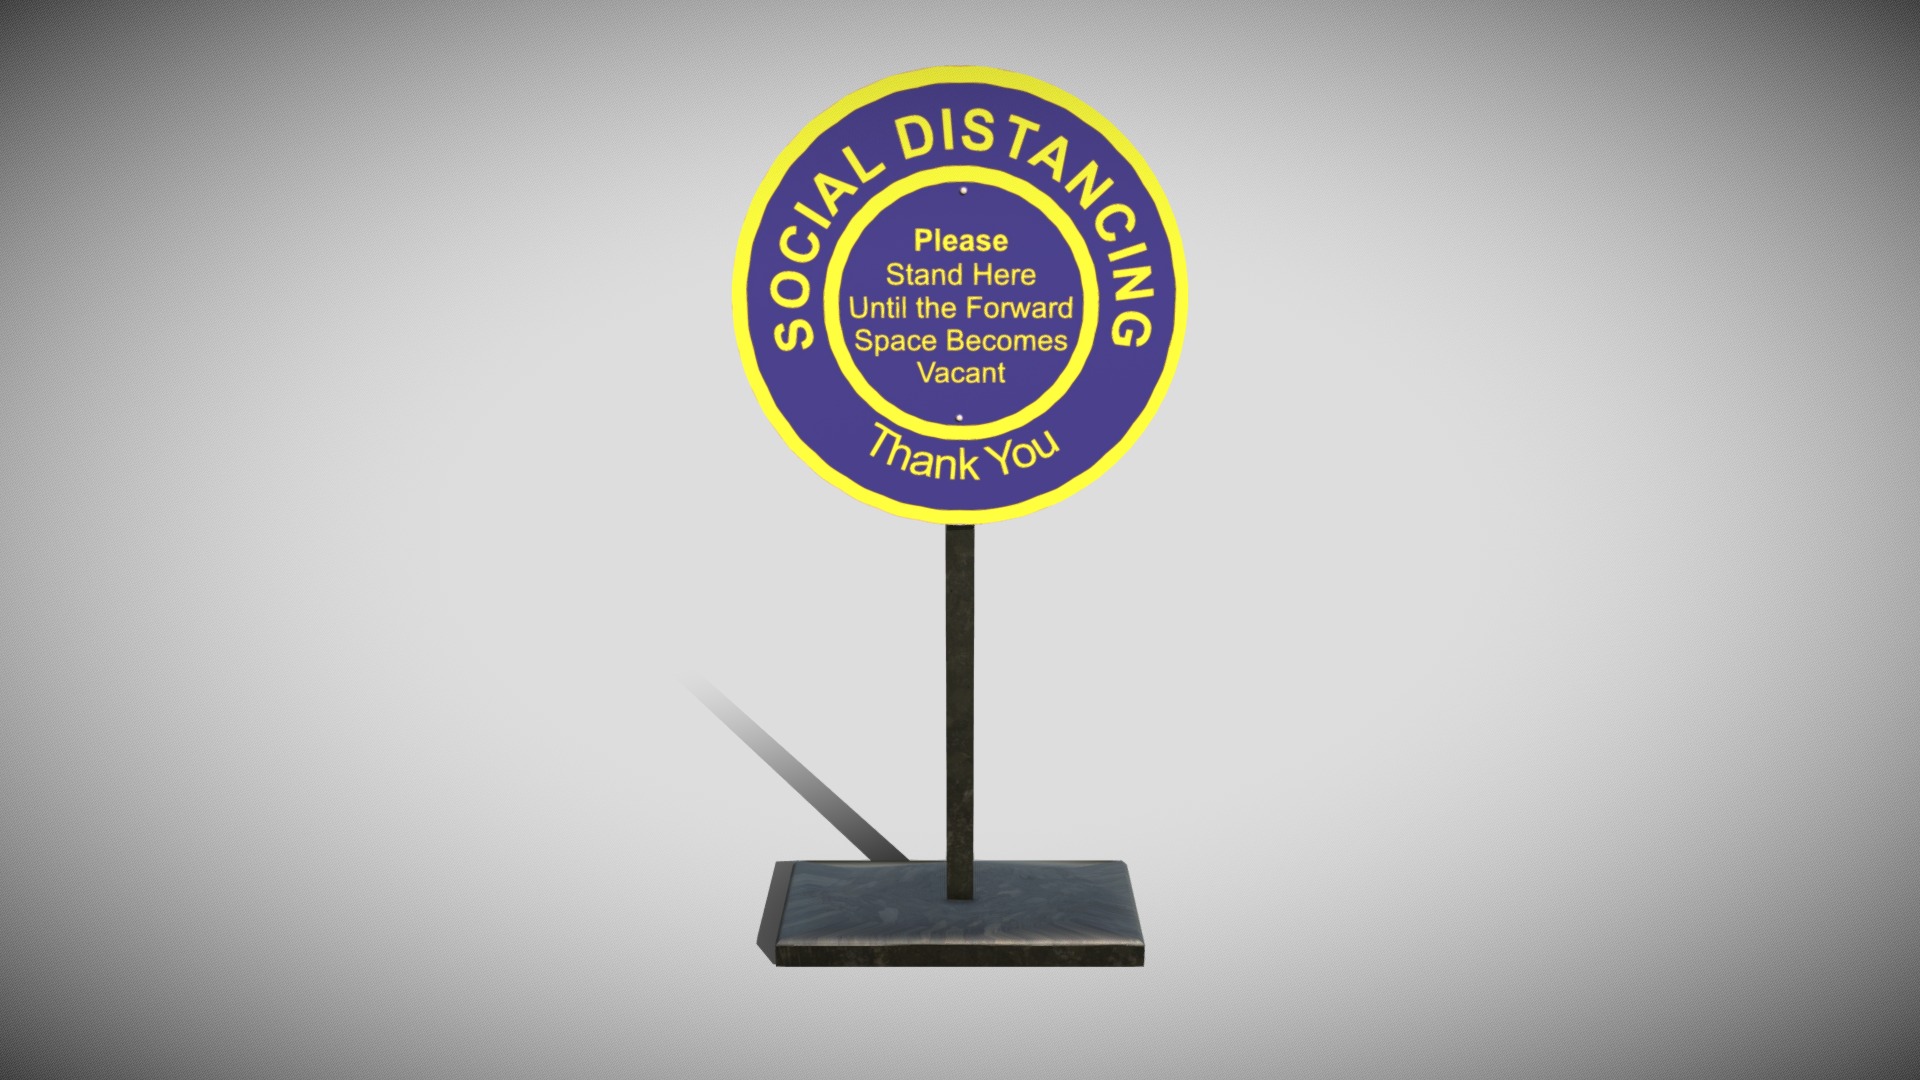 3D model Social Distancing Signage - This is a 3D model of the Social Distancing Signage. The 3D model is about text.